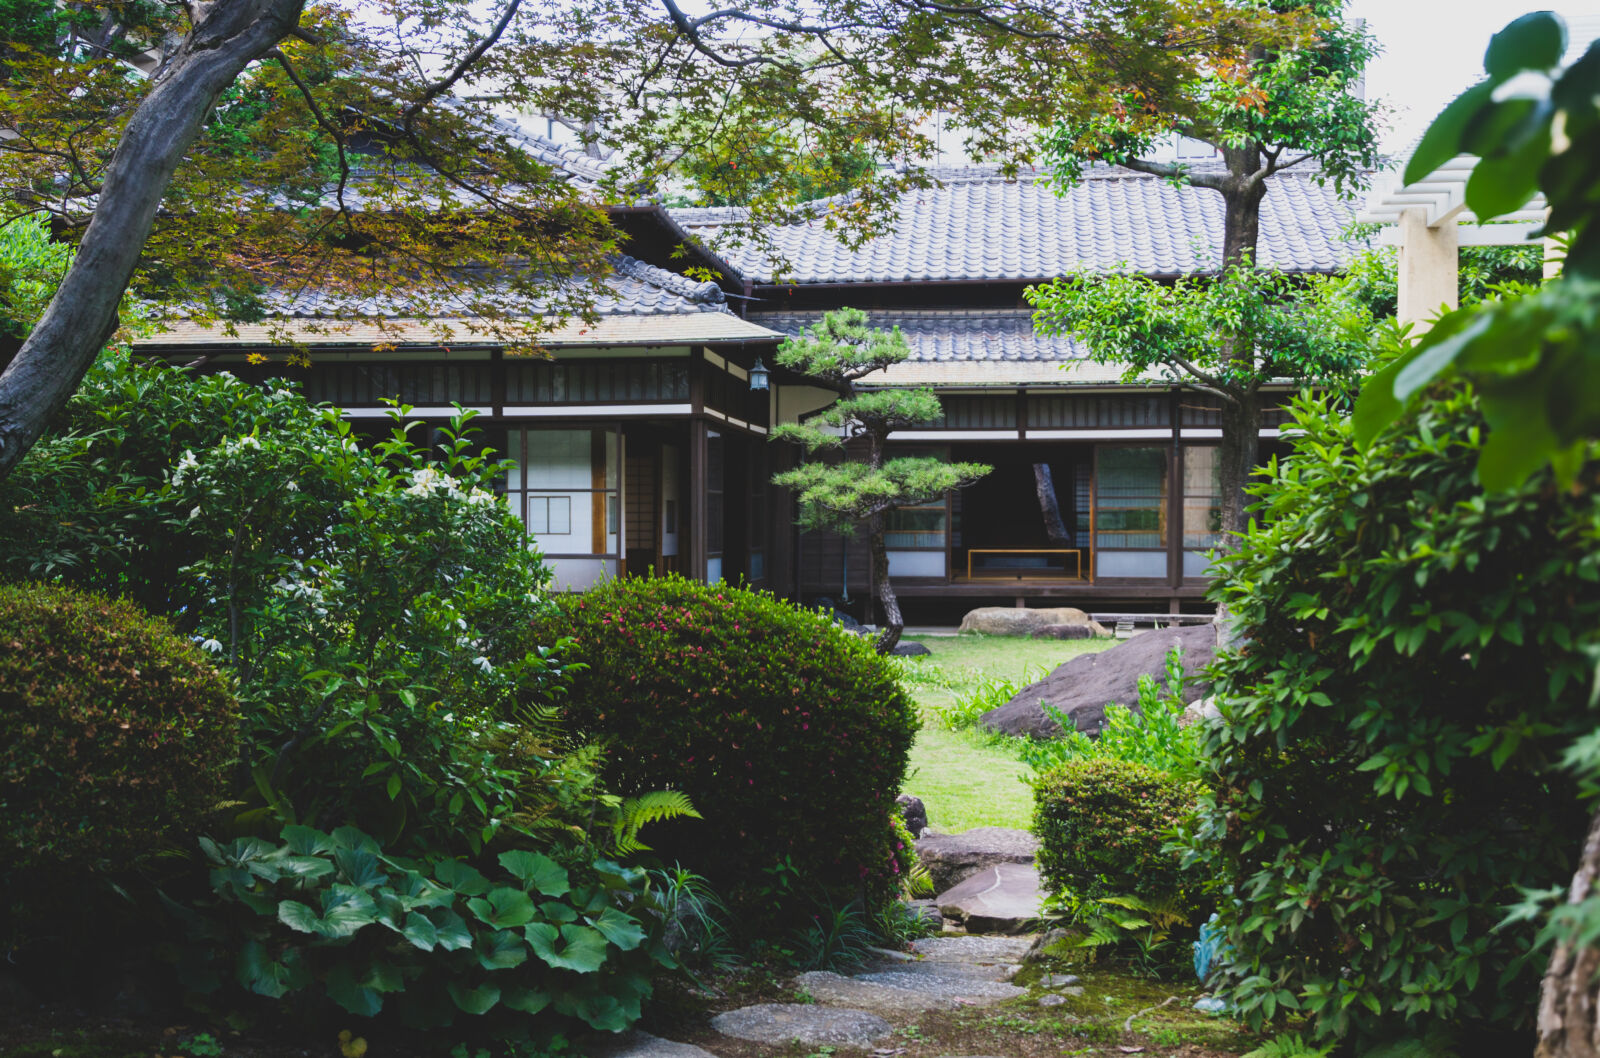 The private gardens of a house on the Nagoya Culture Path